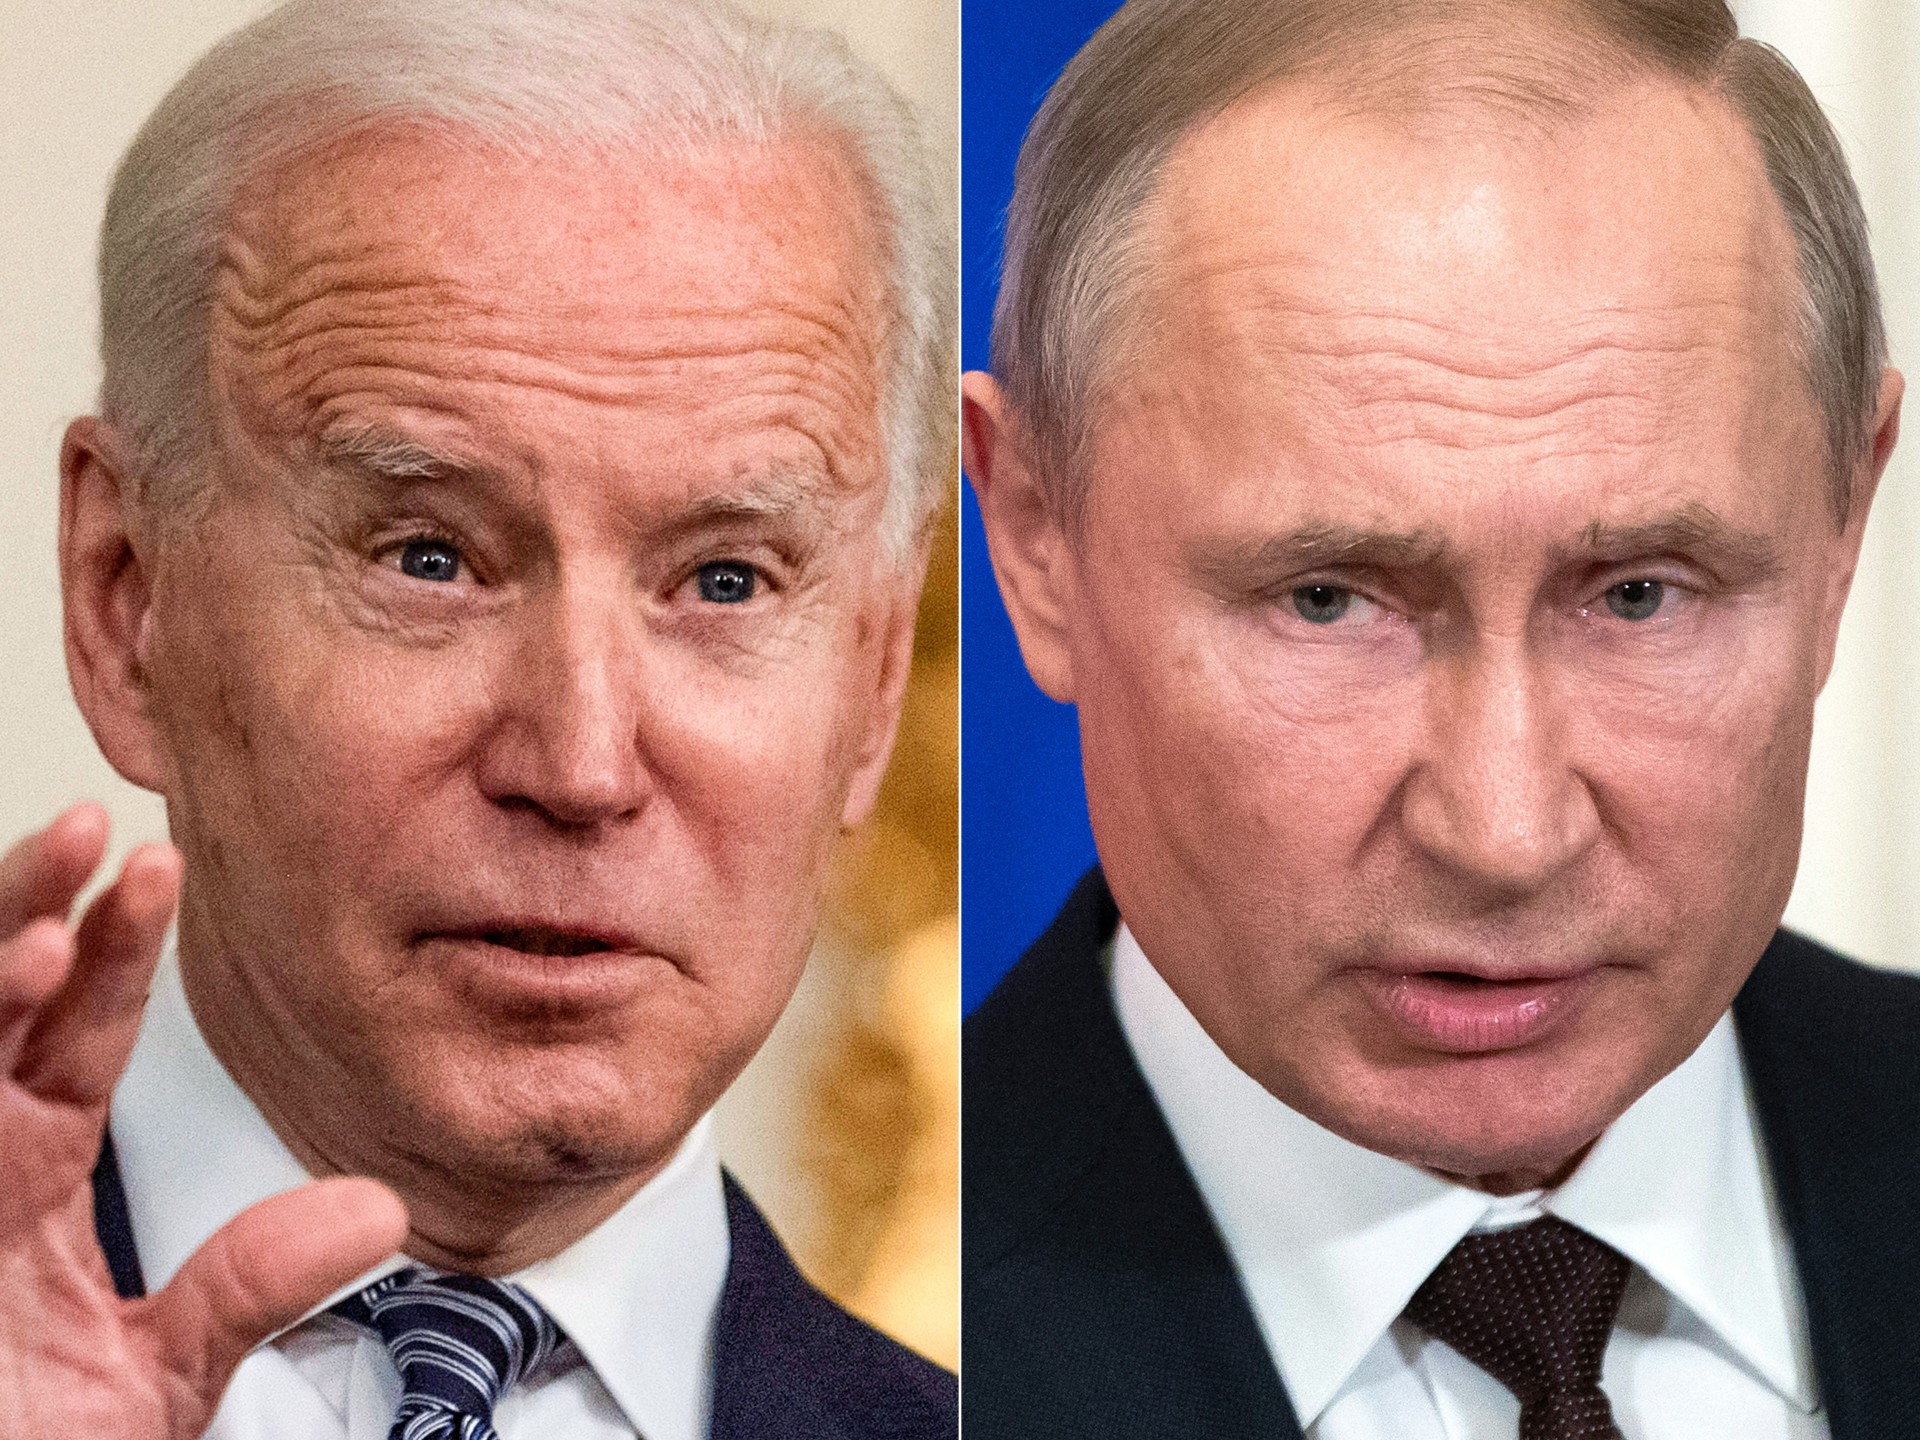 ‘Don’t, don’t don’t’: Biden presses Putin on nuclear weapons